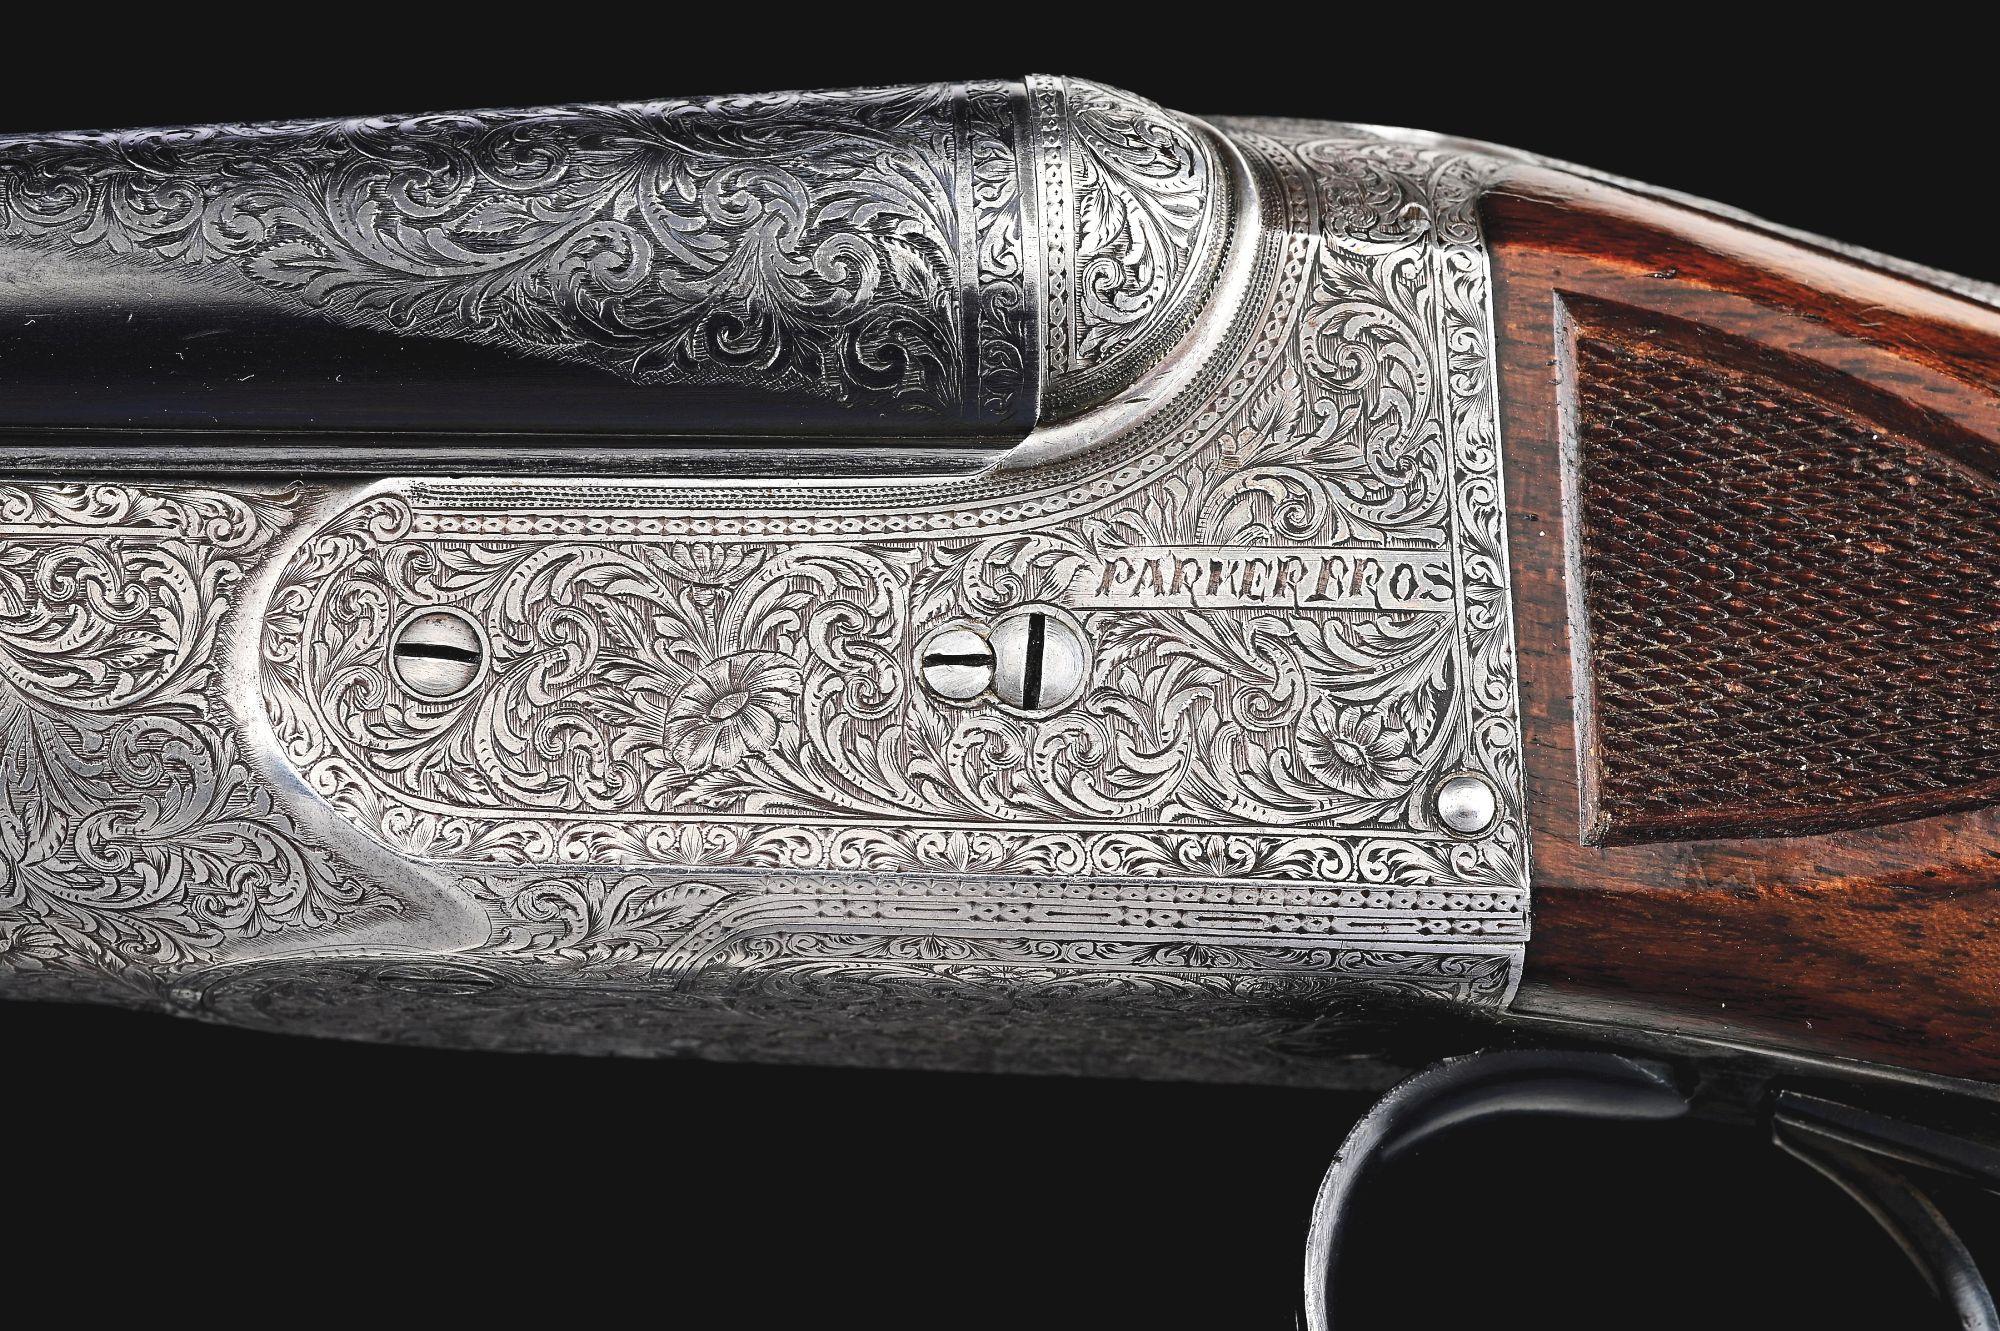 (C) AN OUTSTANDING, EXTREMELY SCARCE PARKER BROTHERS AAHE 28 BORE SIDE BY SIDE SHOTGUN WITH 26" BARR